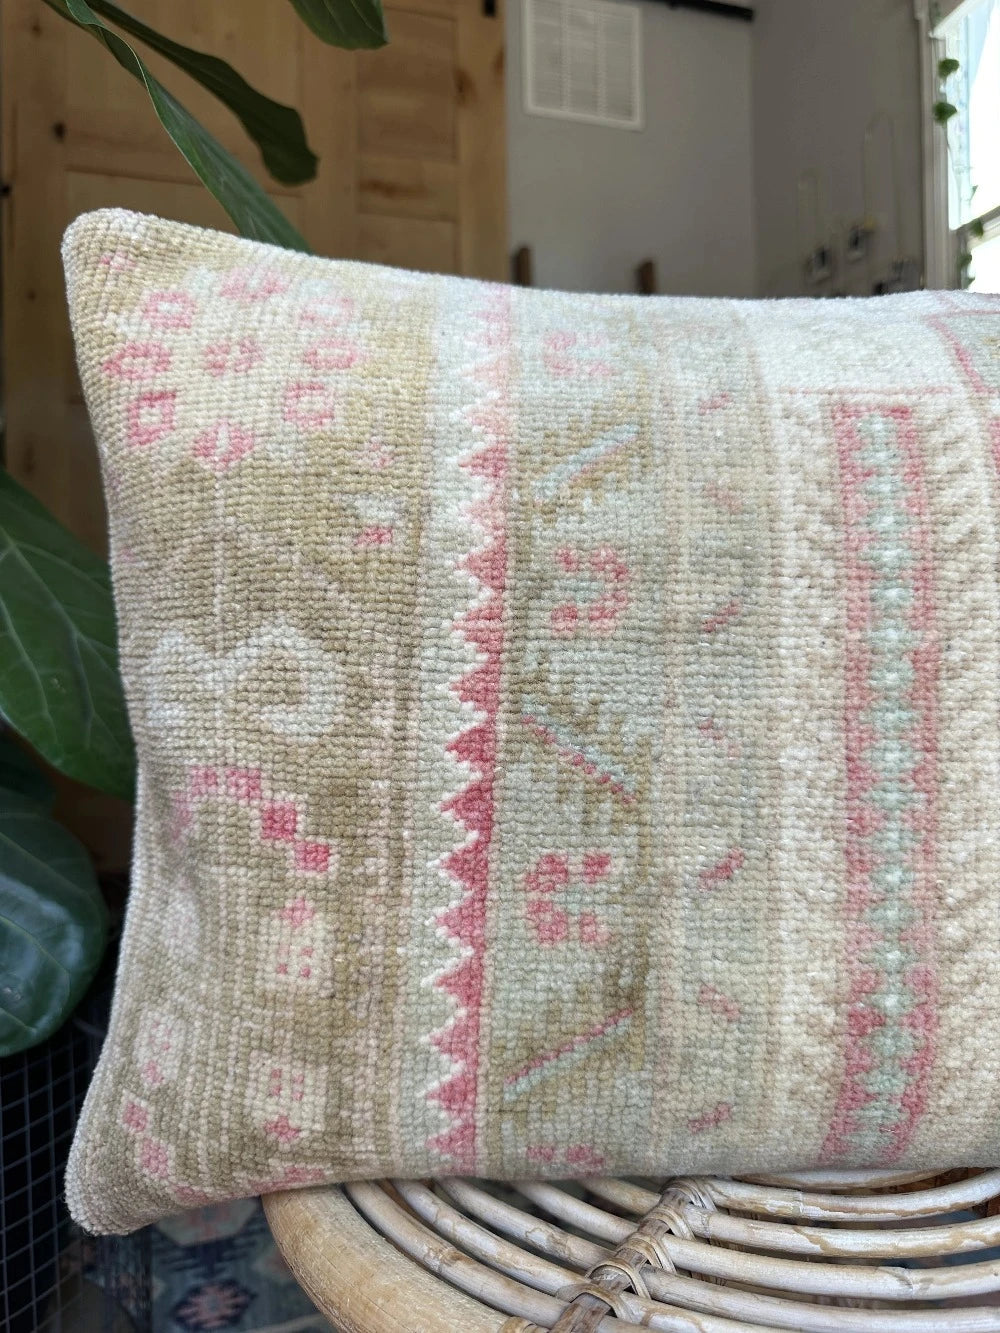 16 by 24 neutral Turkish Lumbar pillow featuring pops of pink and geometric floral pattern throughout